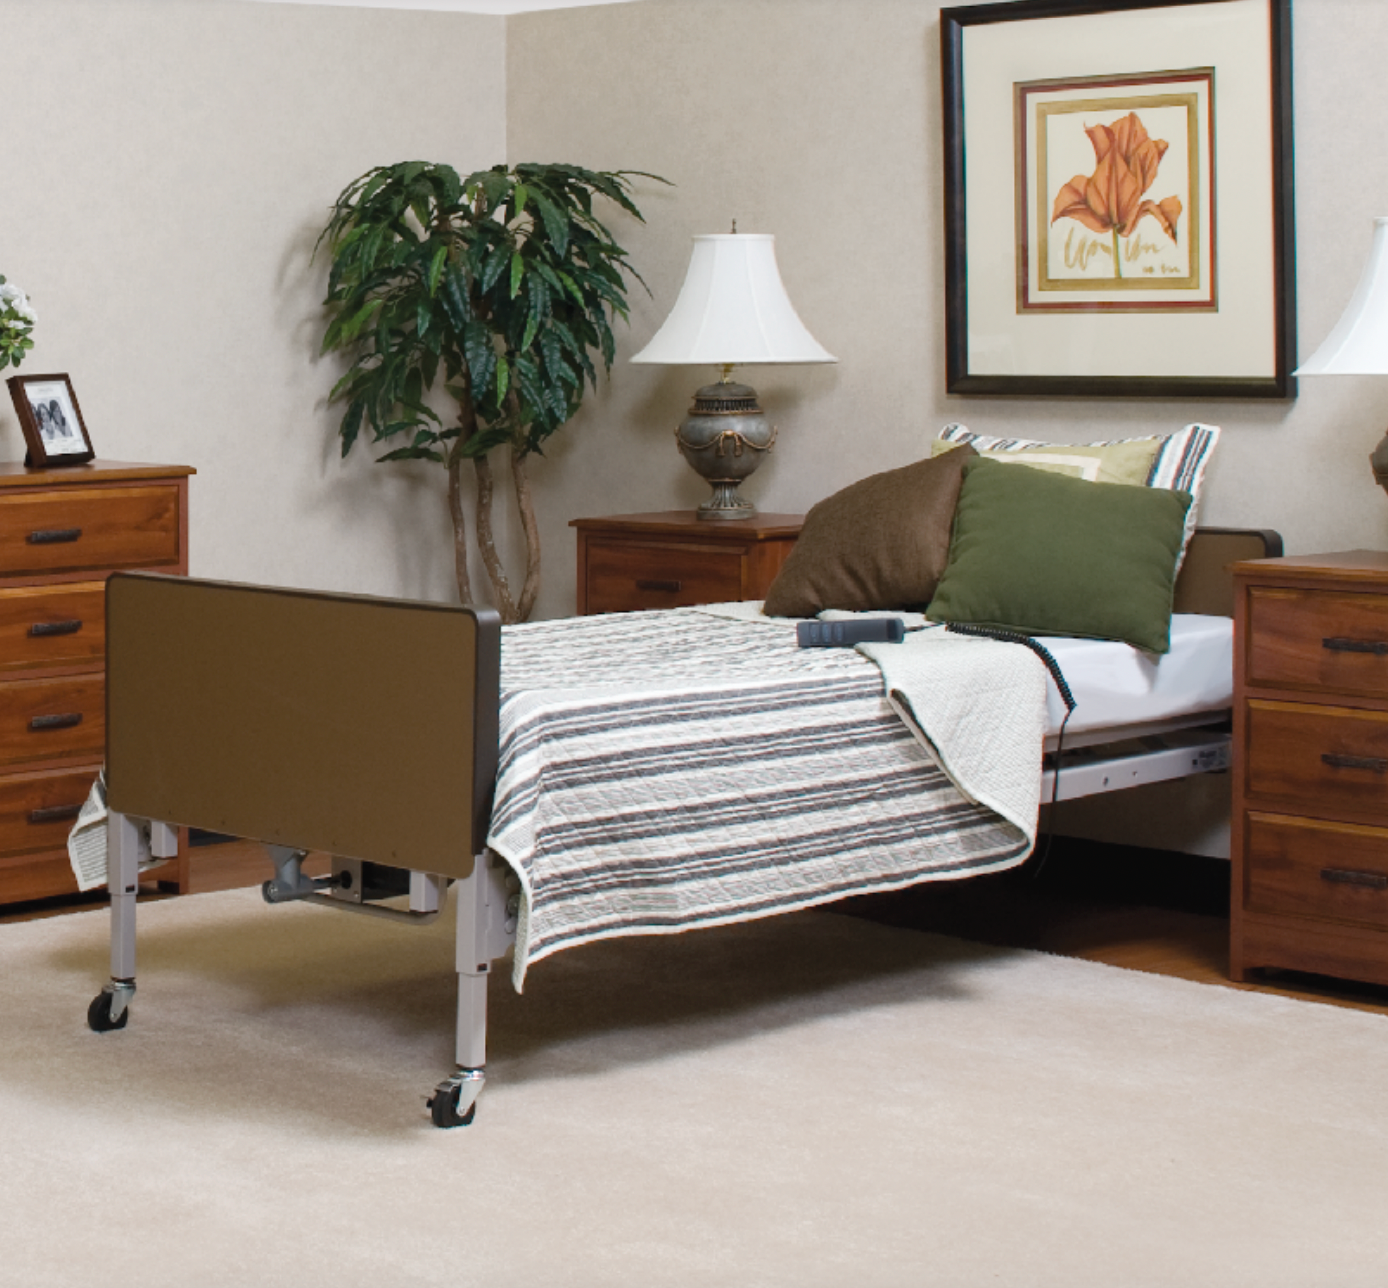 Specialty & Hospital Beds - TMD - Wasatch Medical Supply